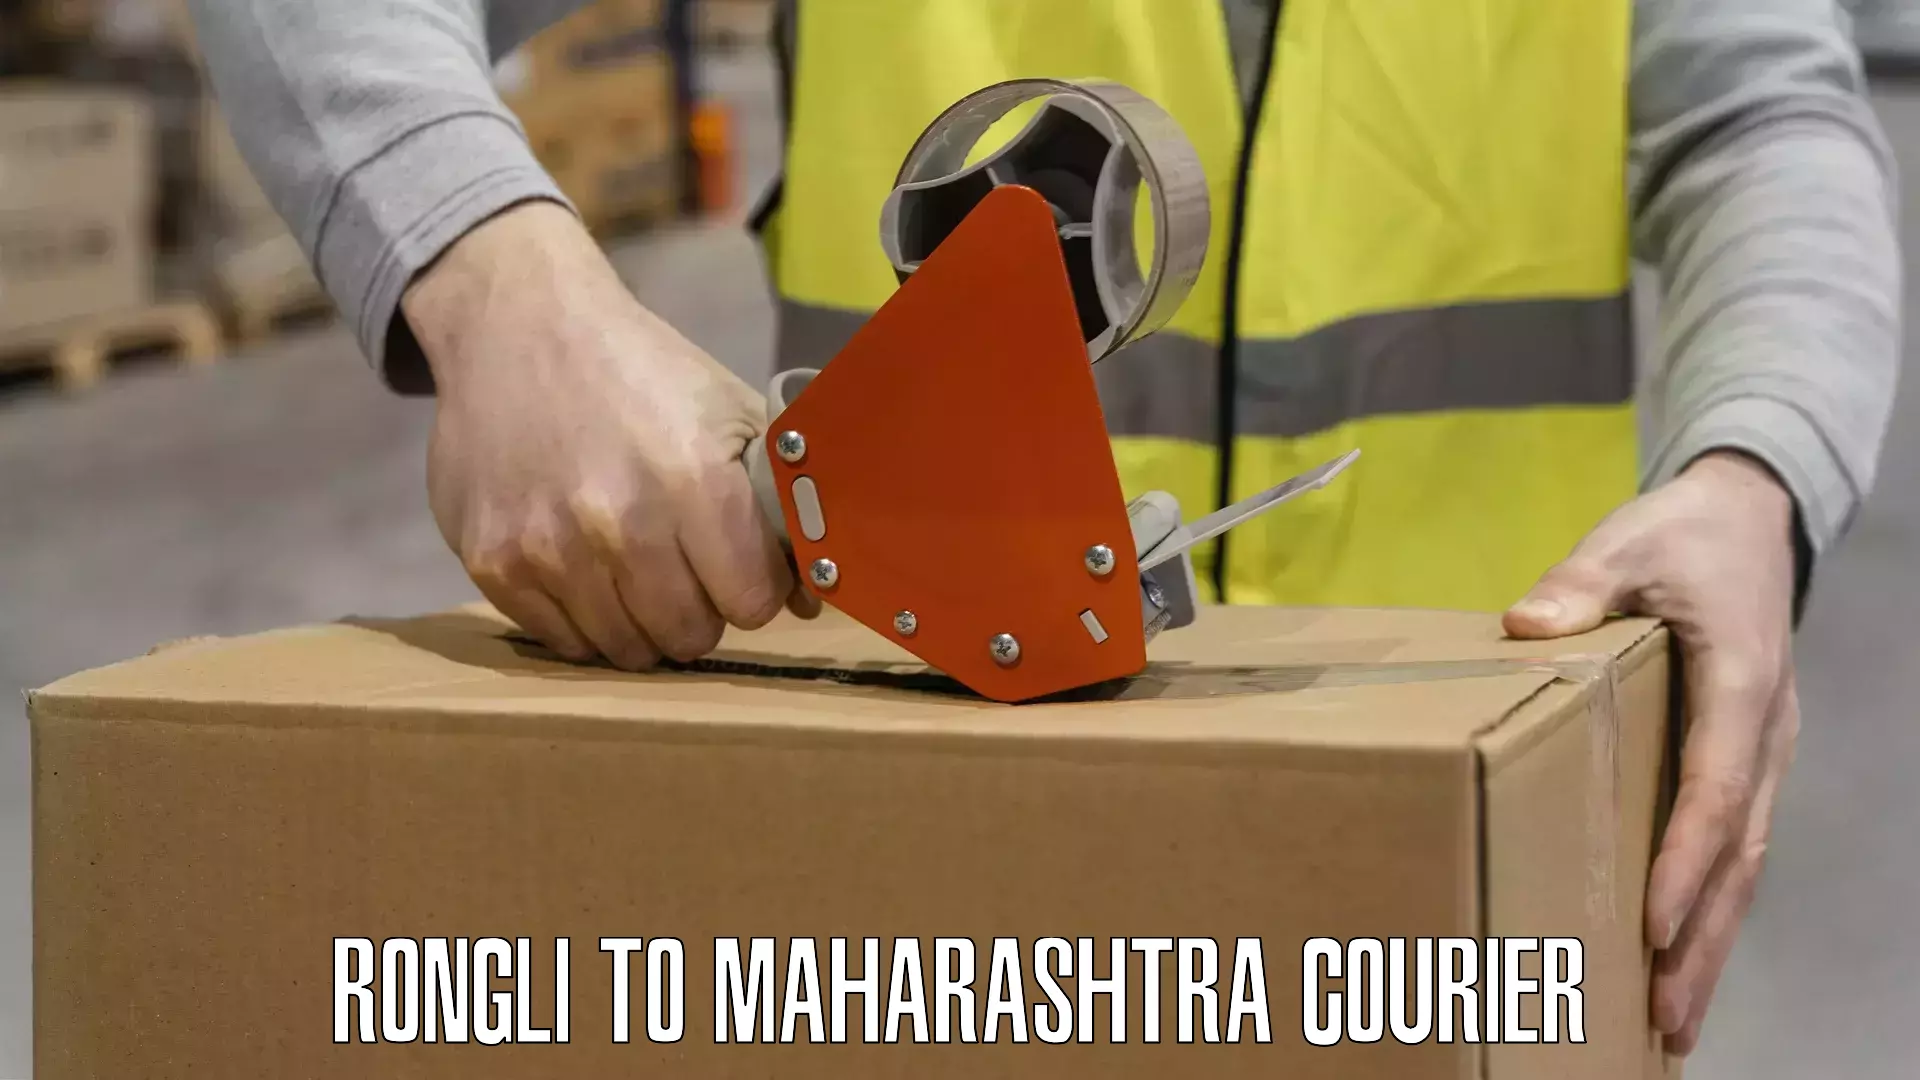 Full-service courier options Rongli to Ahmednagar